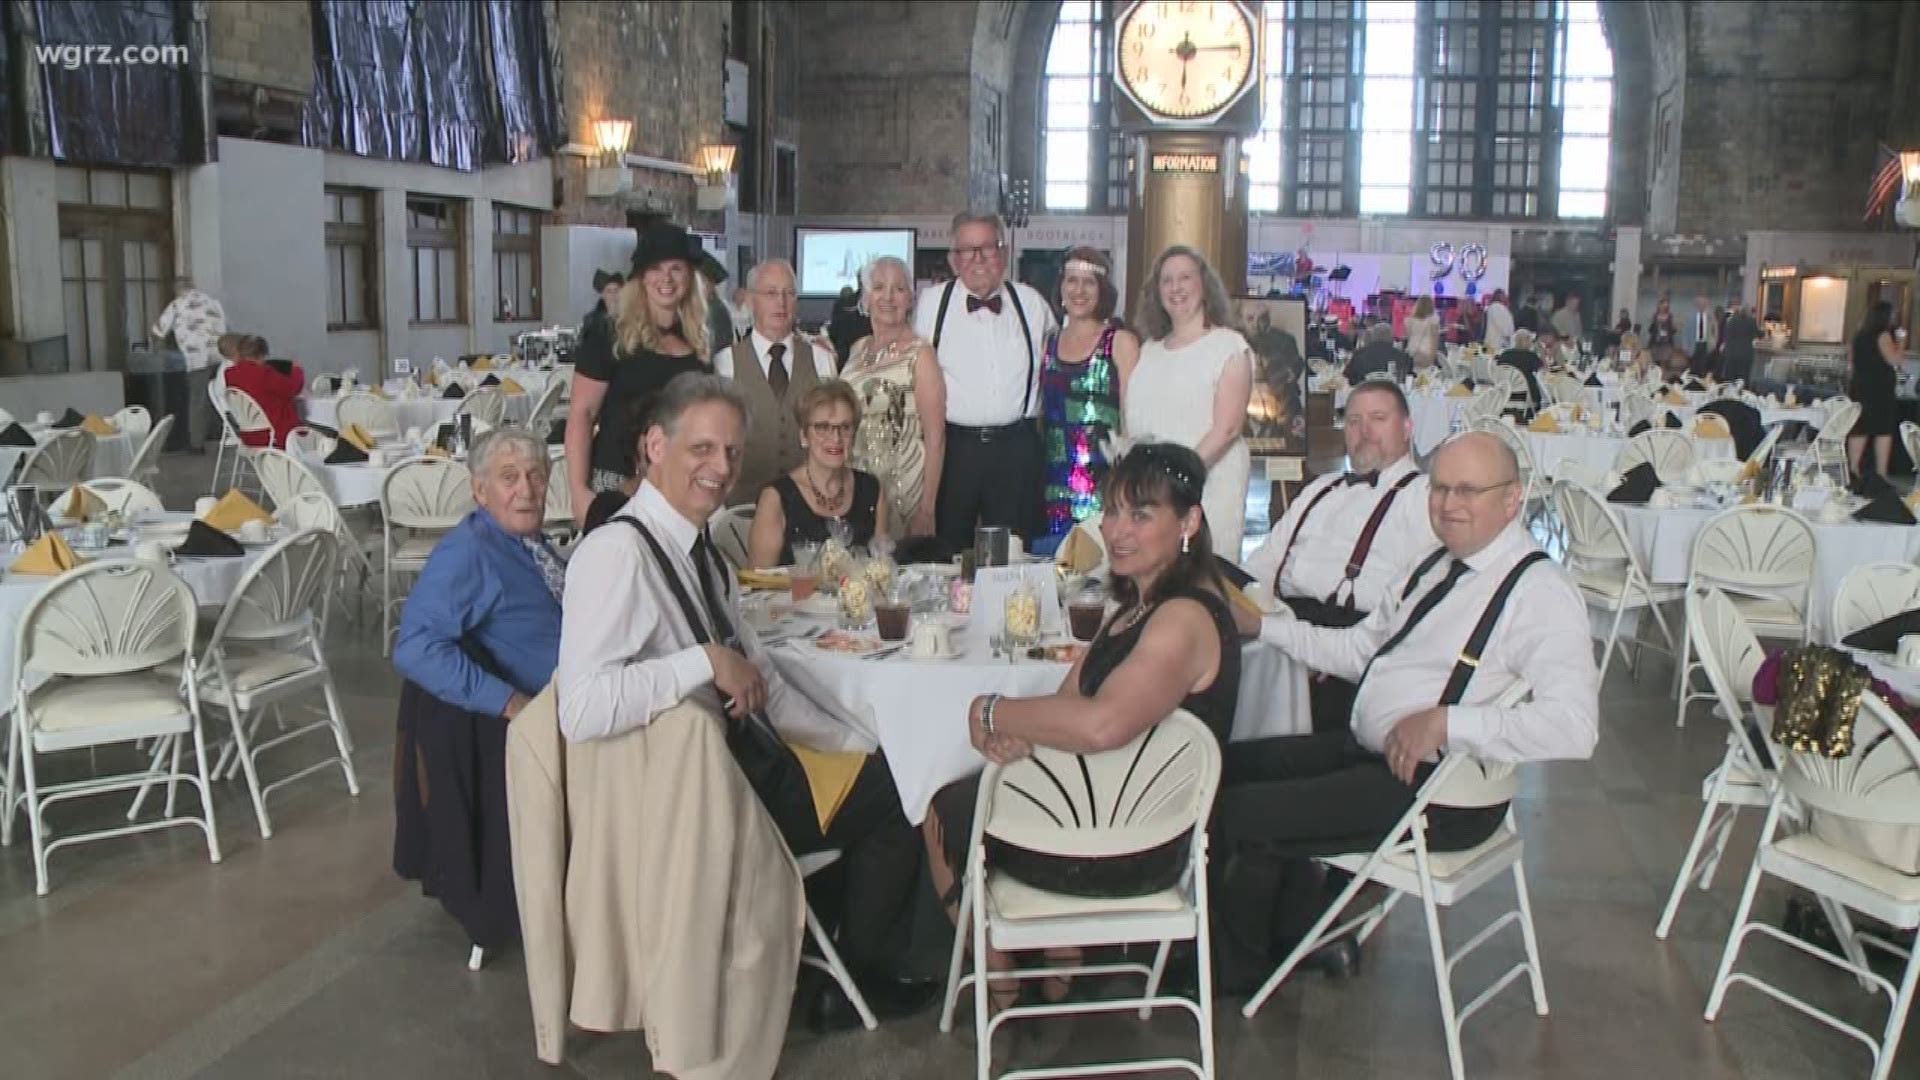 Buffalo's Central Terminal celebrated its 90th anniversary tonight with a Great Gatsby themed dinner dance.